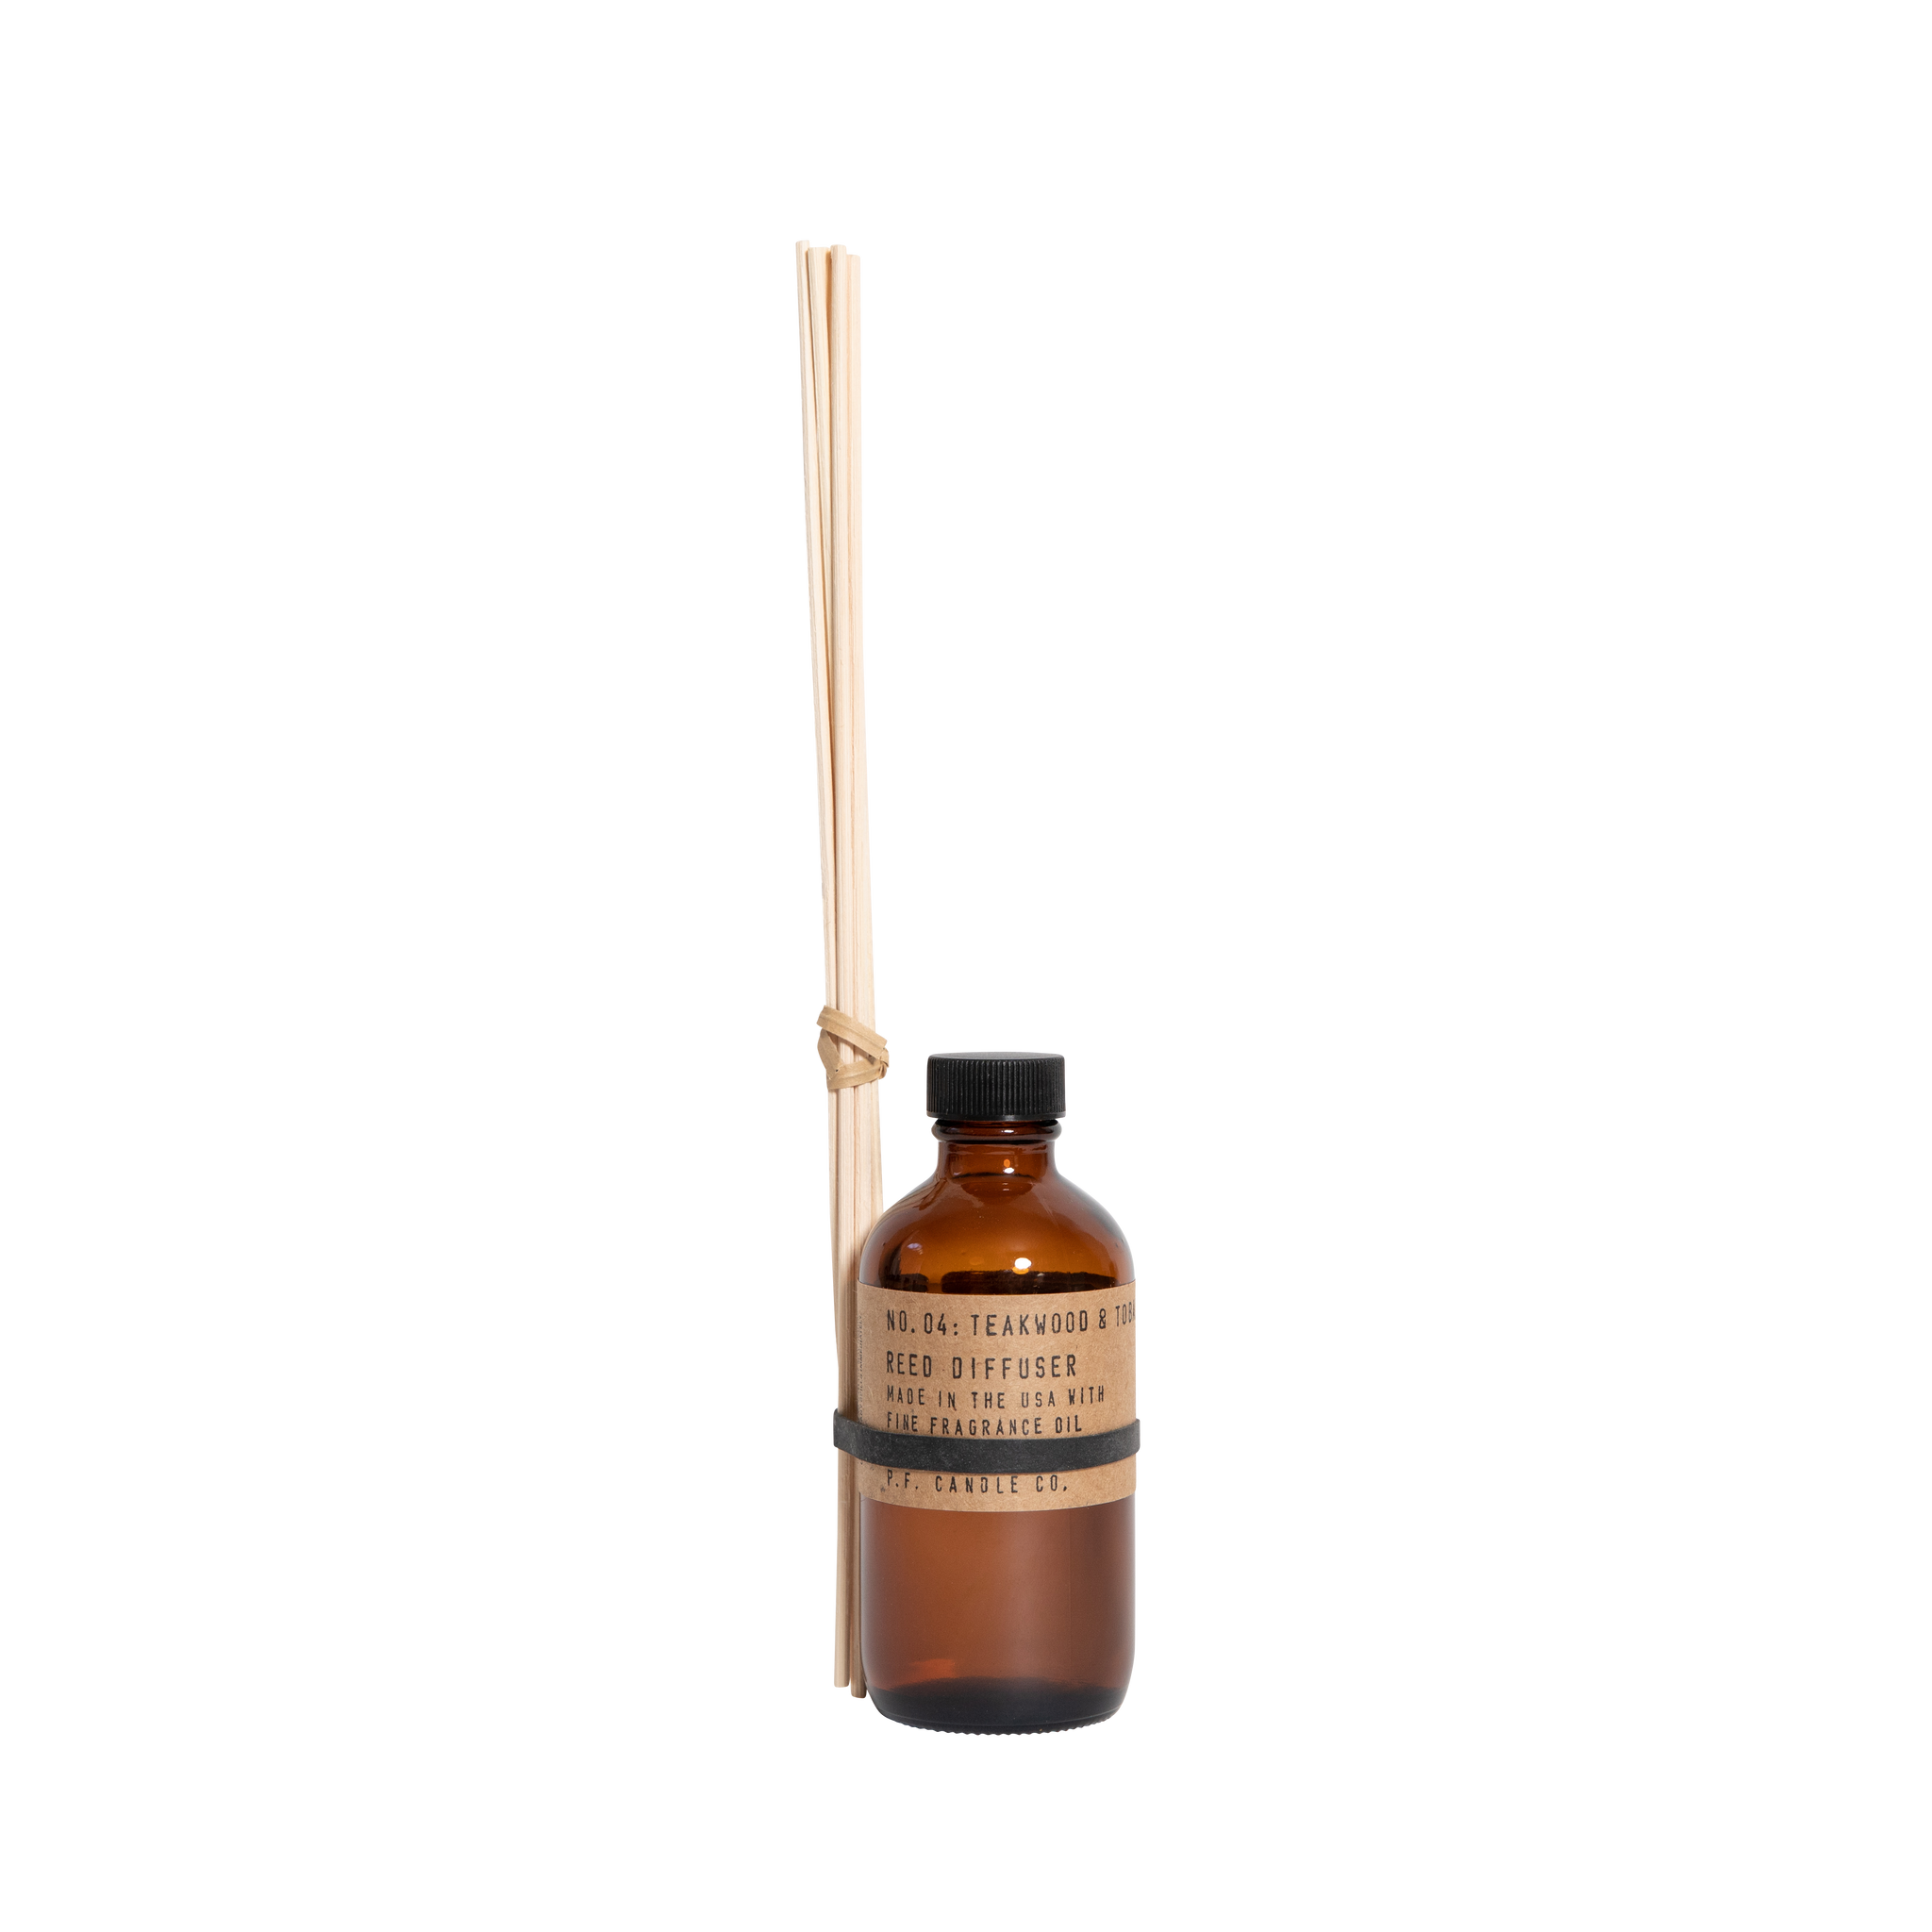 LOVSPA Mahogany Teakwood Reed Diffuser Oil Refill with Replacement Reed Sticks | Rich Mahogany, Teakwood, Cardamom, Geranium & Amber | Scent for